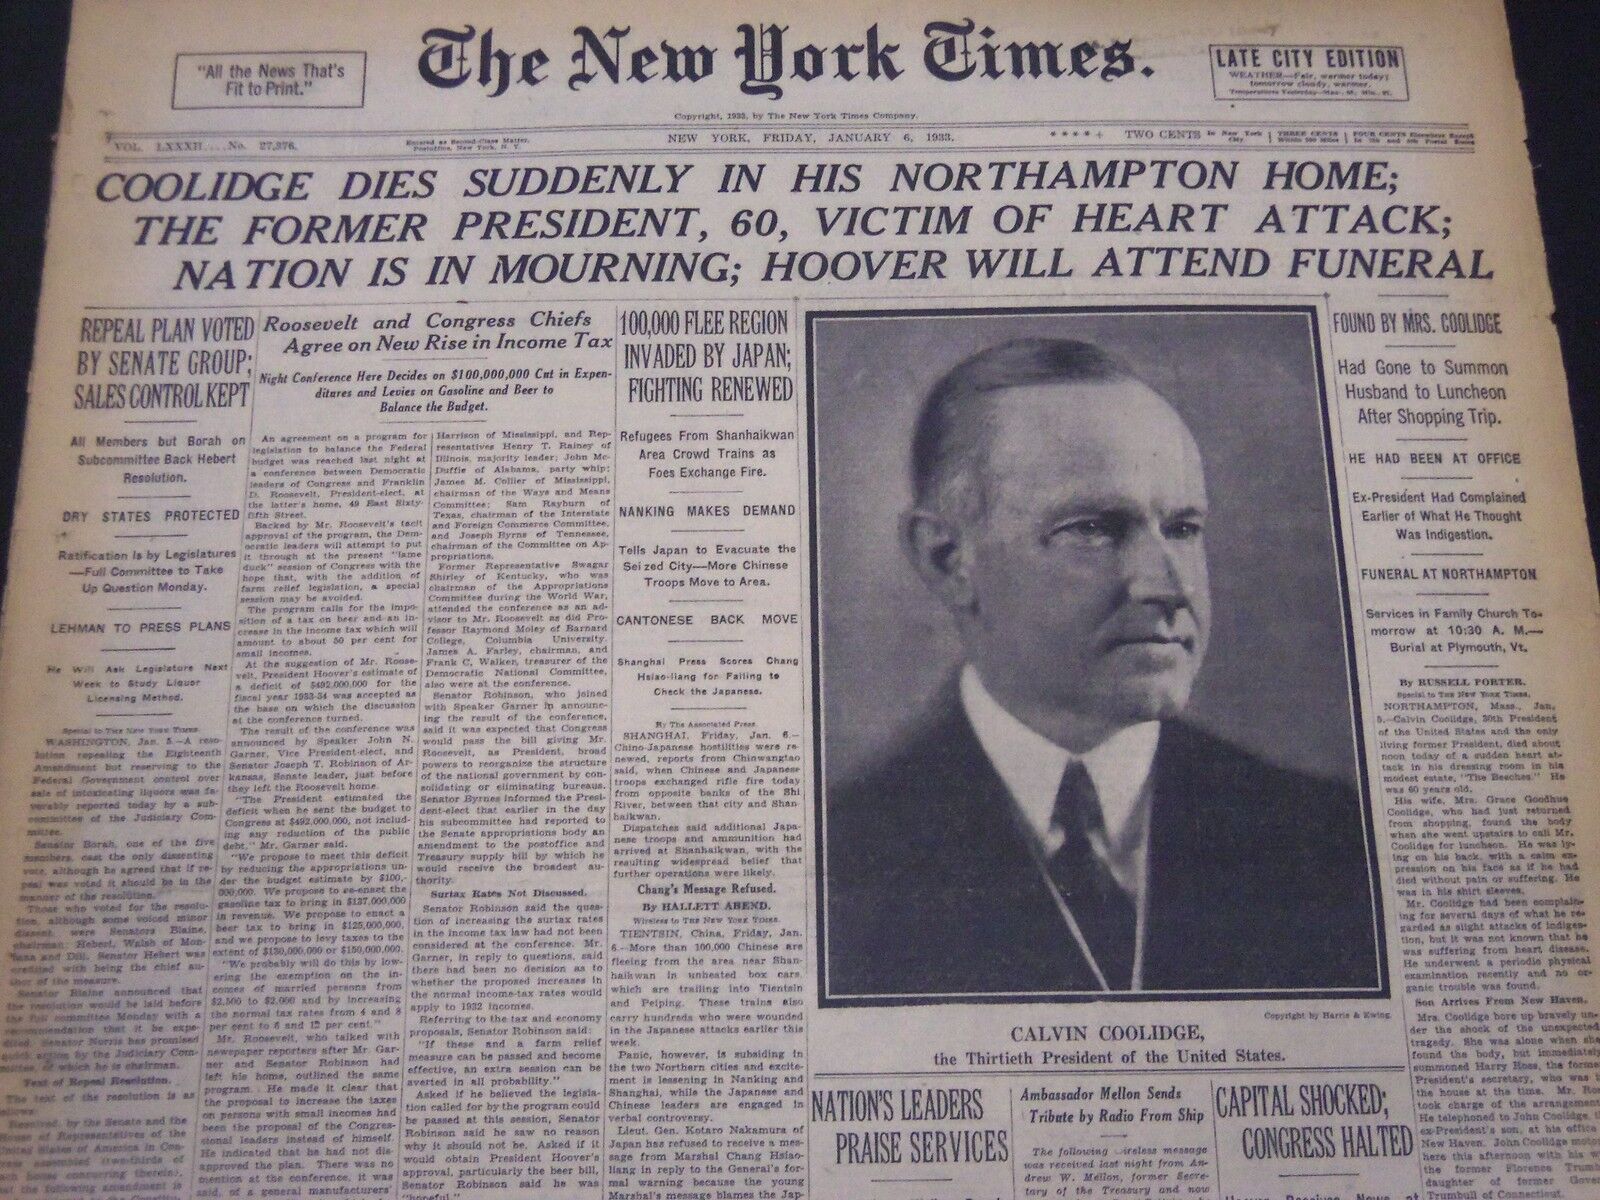 1933 JANUARY 6 NEW YORK TIMES - COOLIDGE DIES SUDDENLY IN HIS HOME - NT 5251